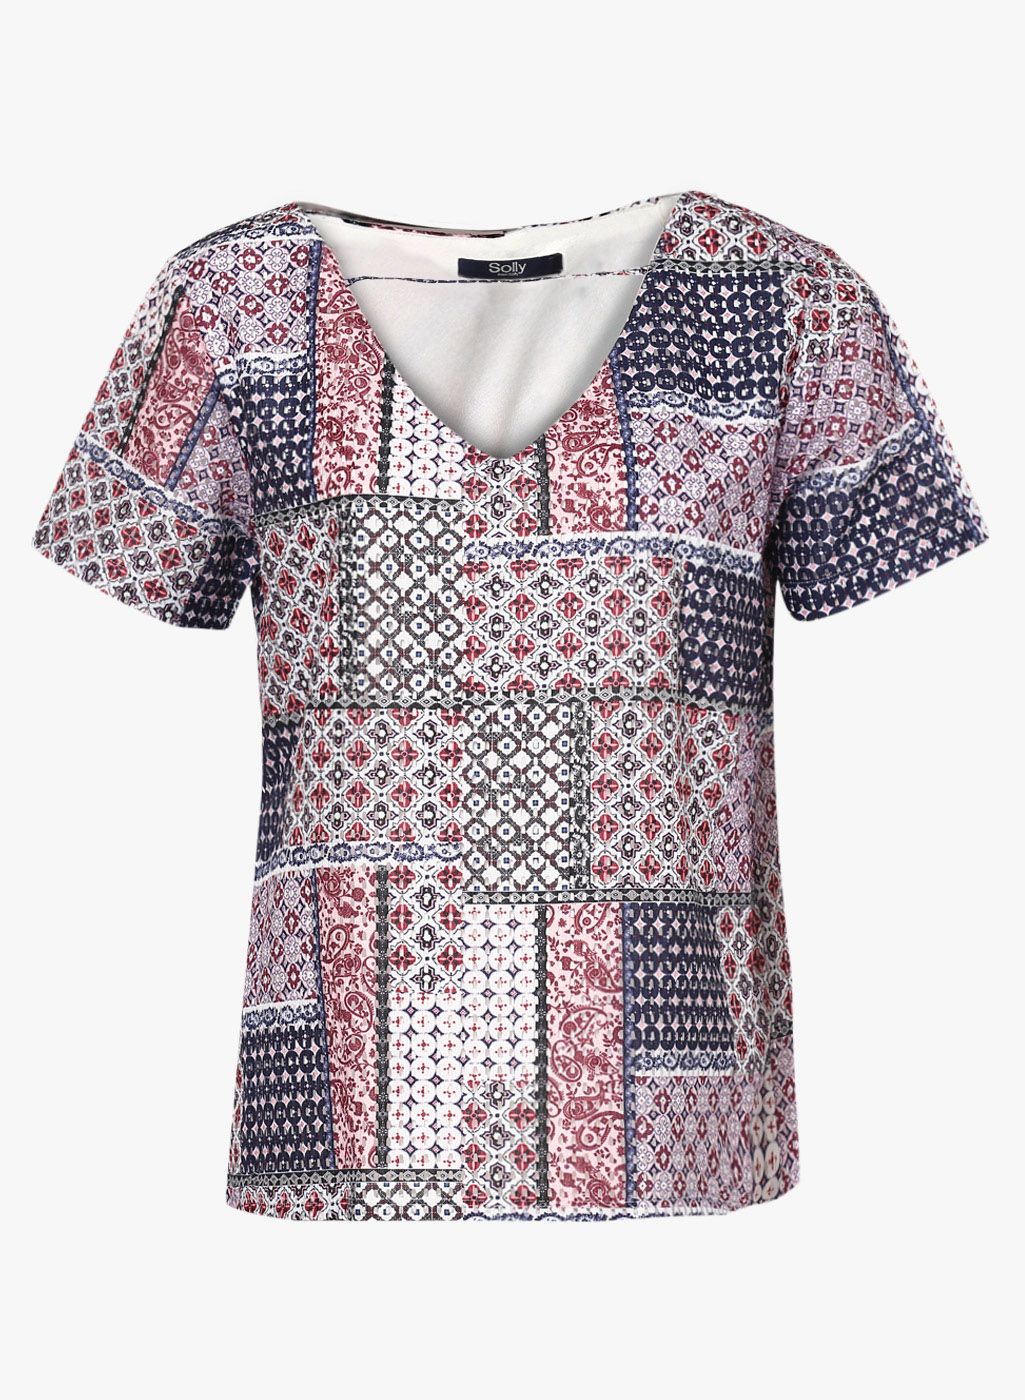 Allen Solly Women White & Maroon Printed Top Price in India